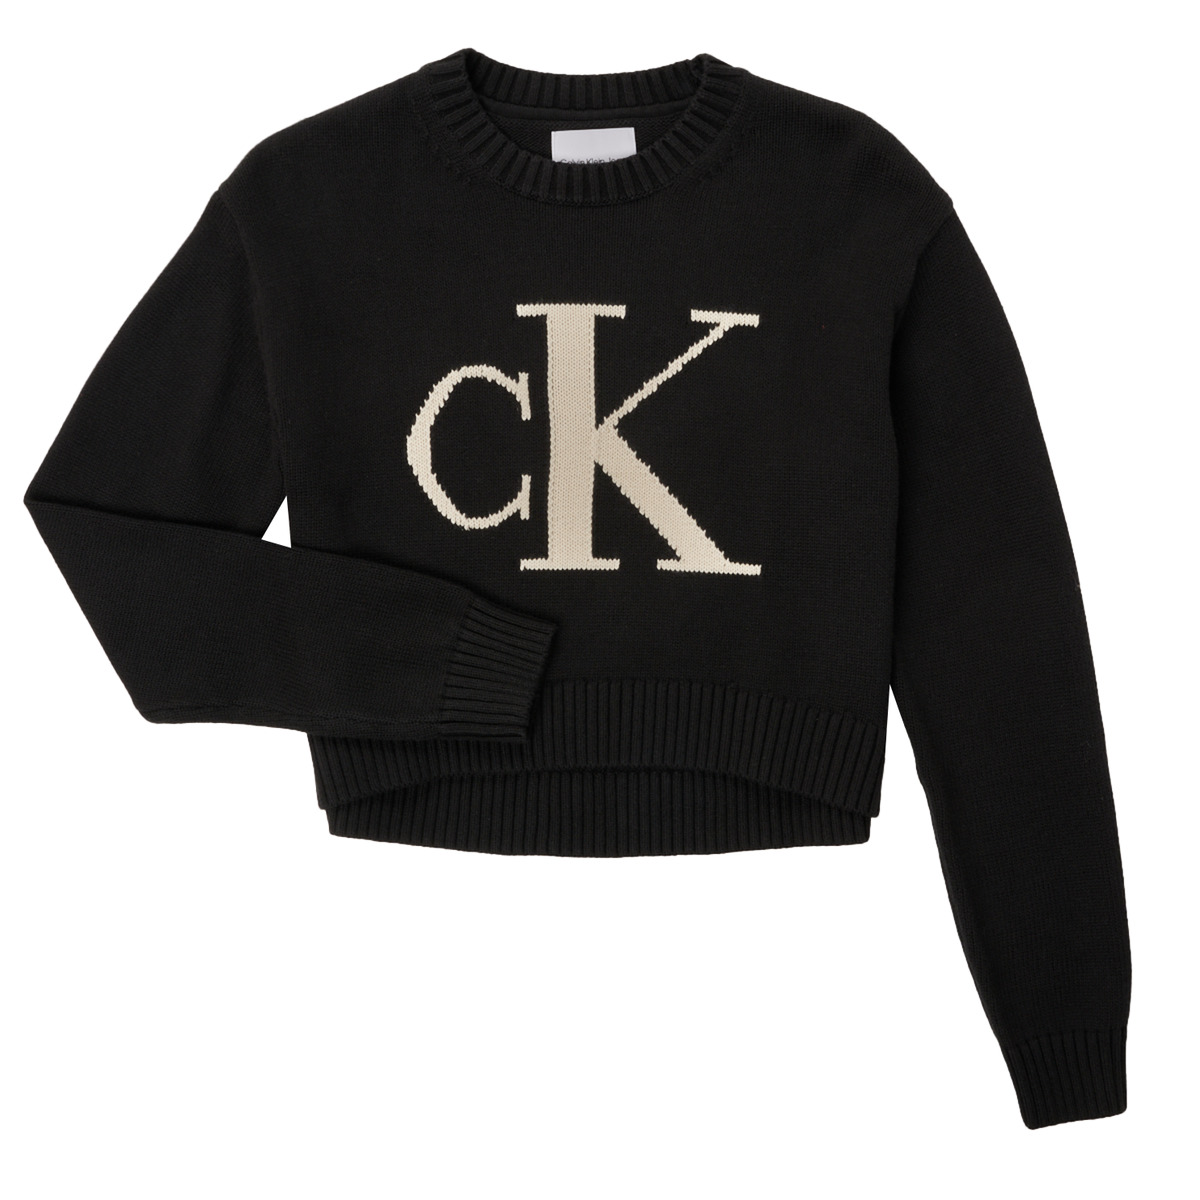 delivery ! Free Spartoo Clothing - Black Calvin Klein | - sweaters MONOGRAM Child NET Jeans SWEATER